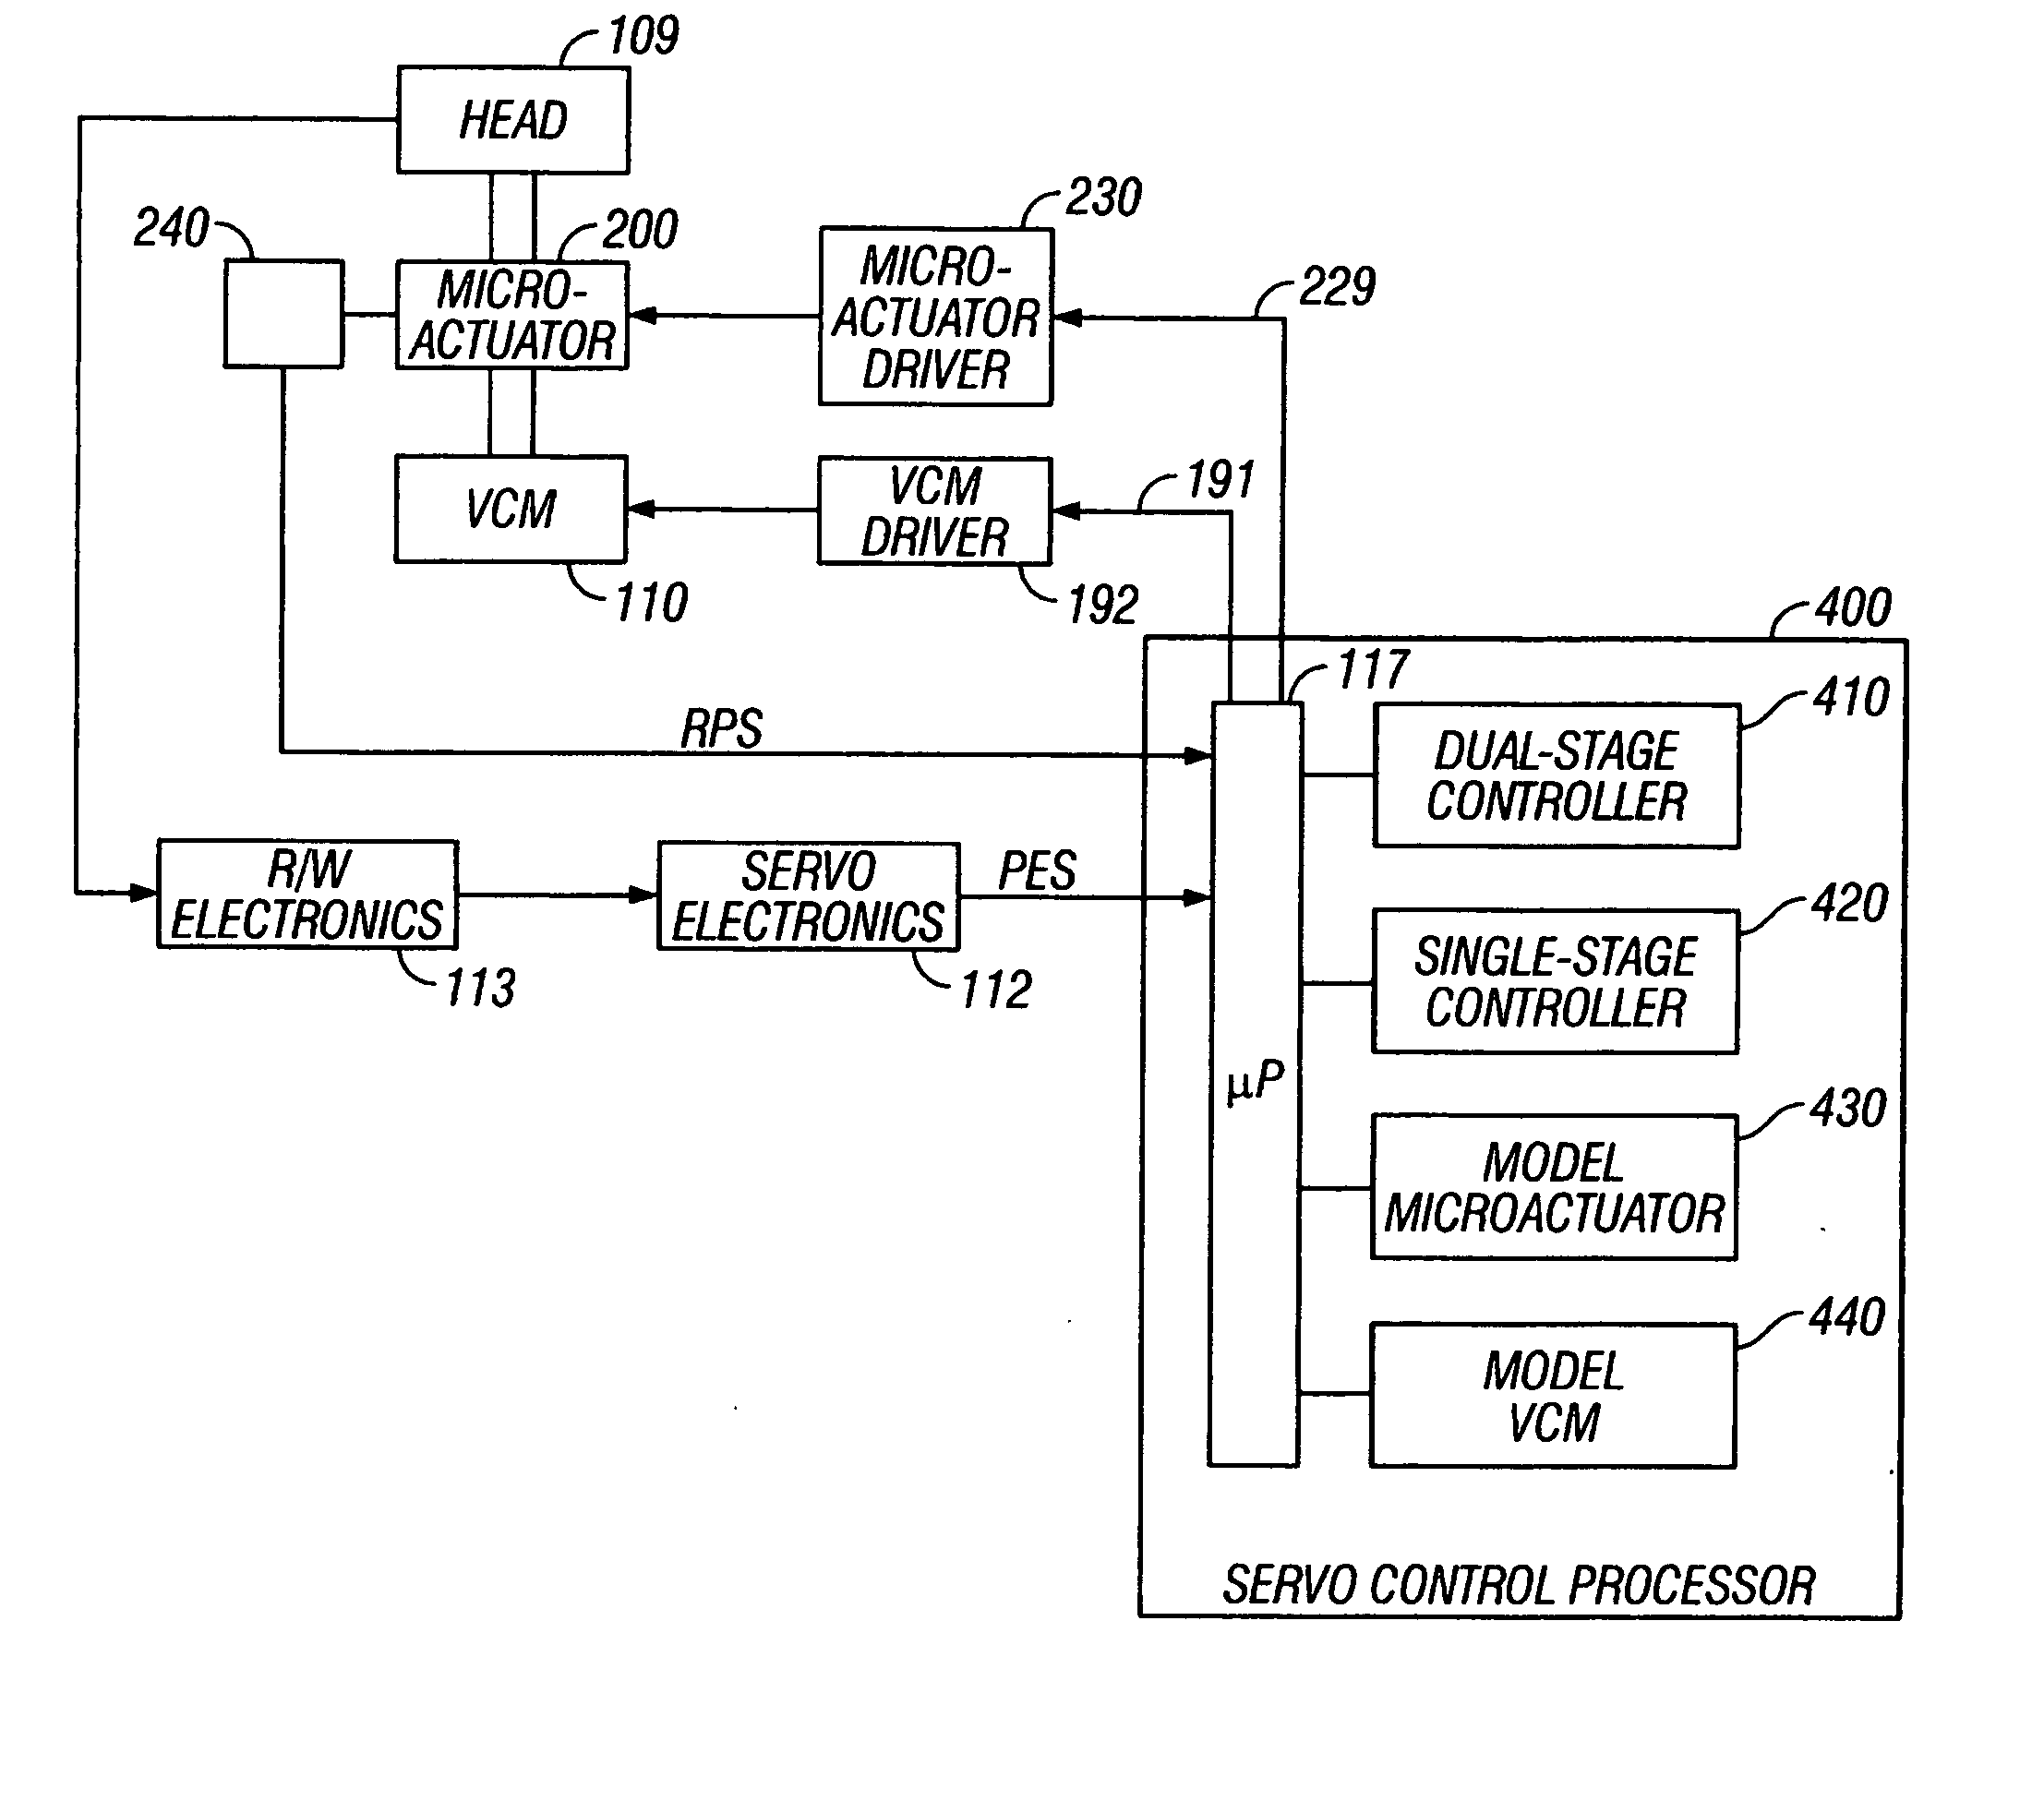 Magnetic recording disk drive with dual-stage actuator and control system with multiple controllers